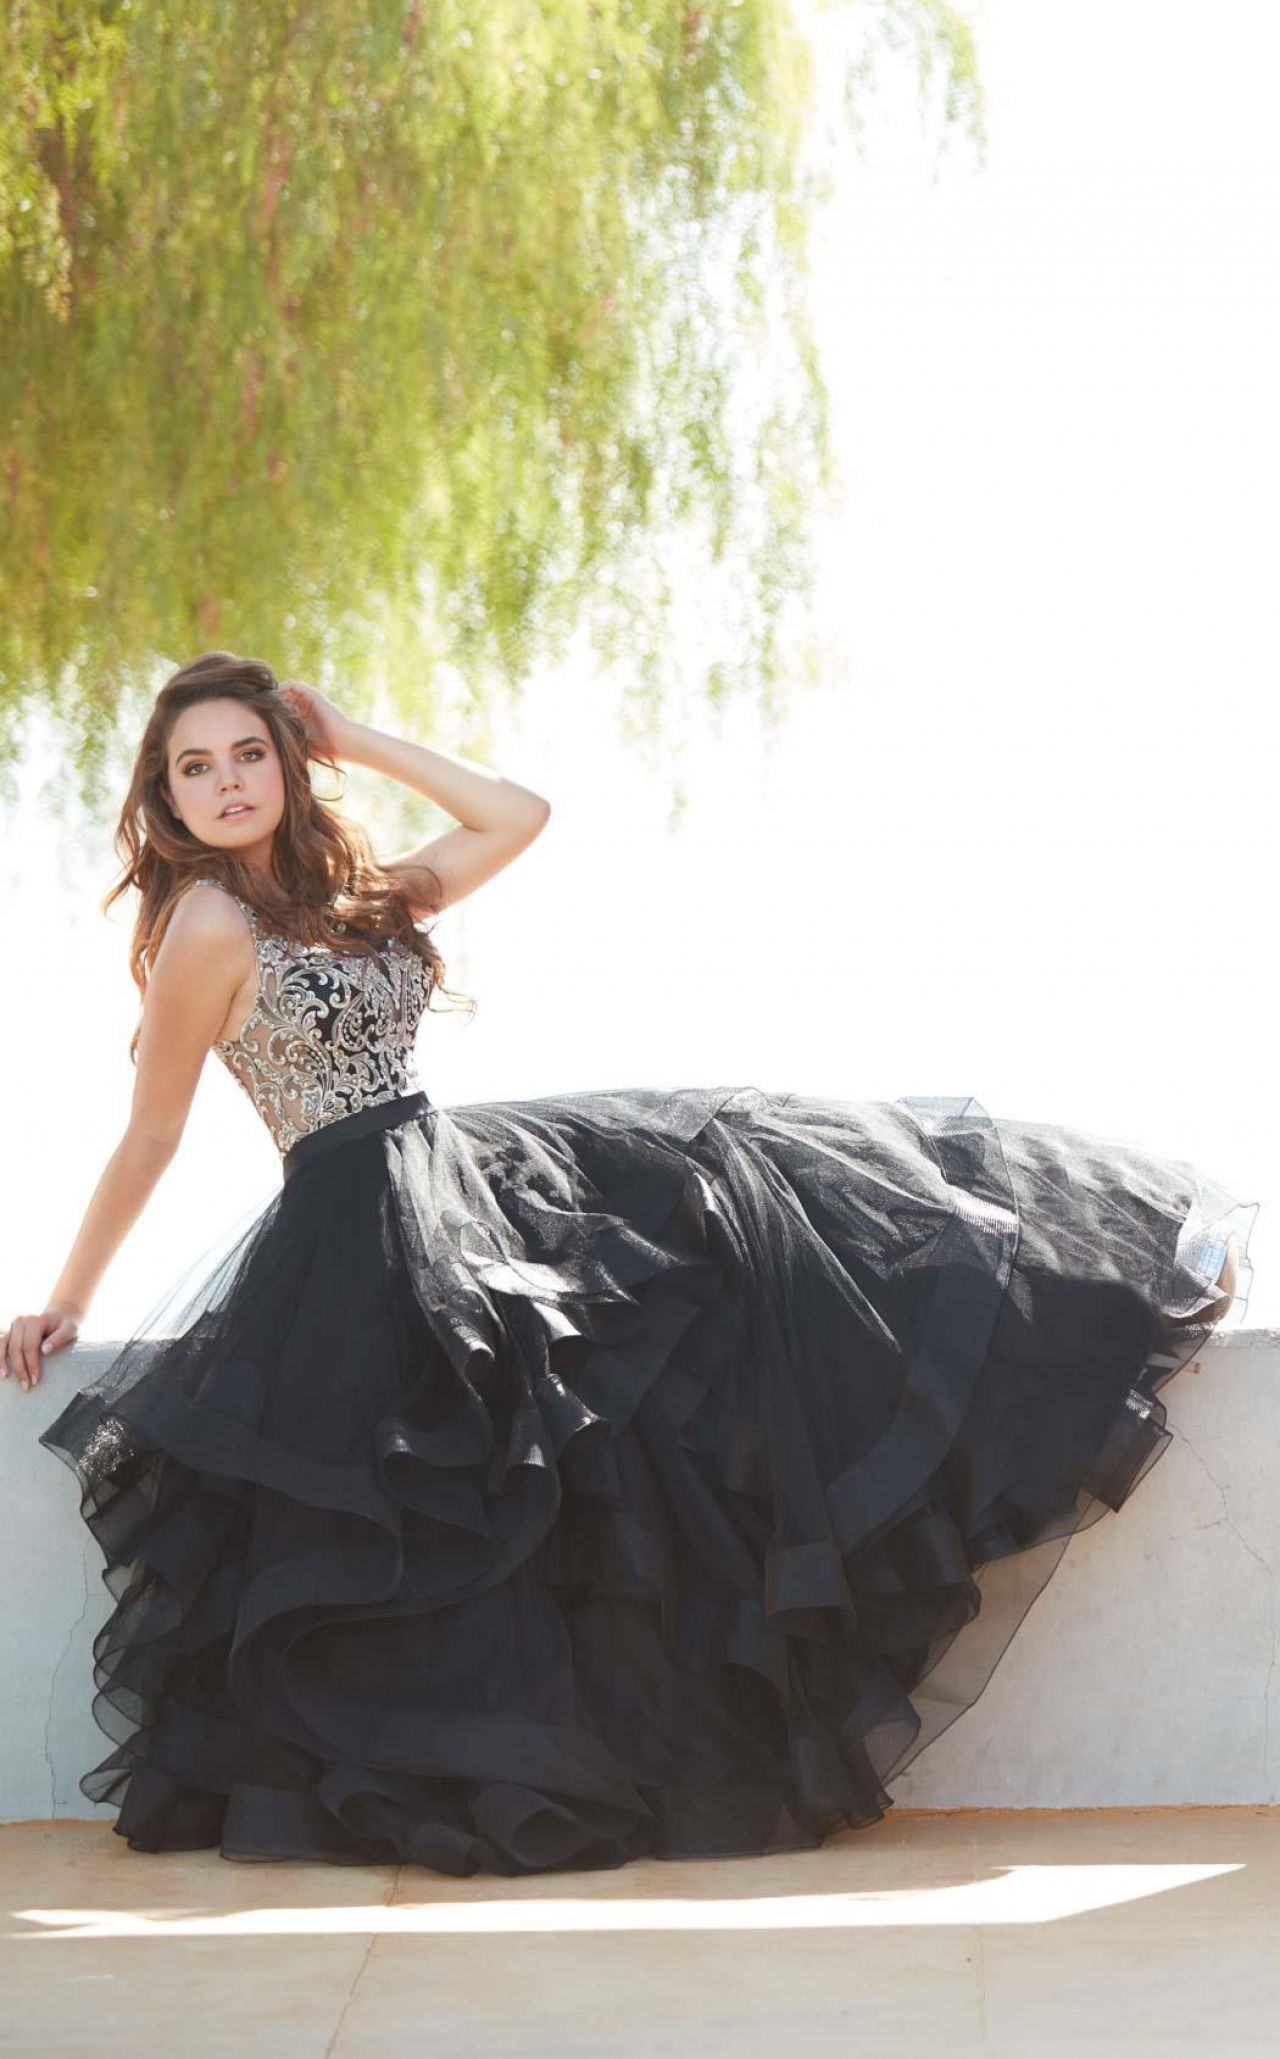 http://www.theplace.ru/archive/bailee_madison/img/9(17).jpg